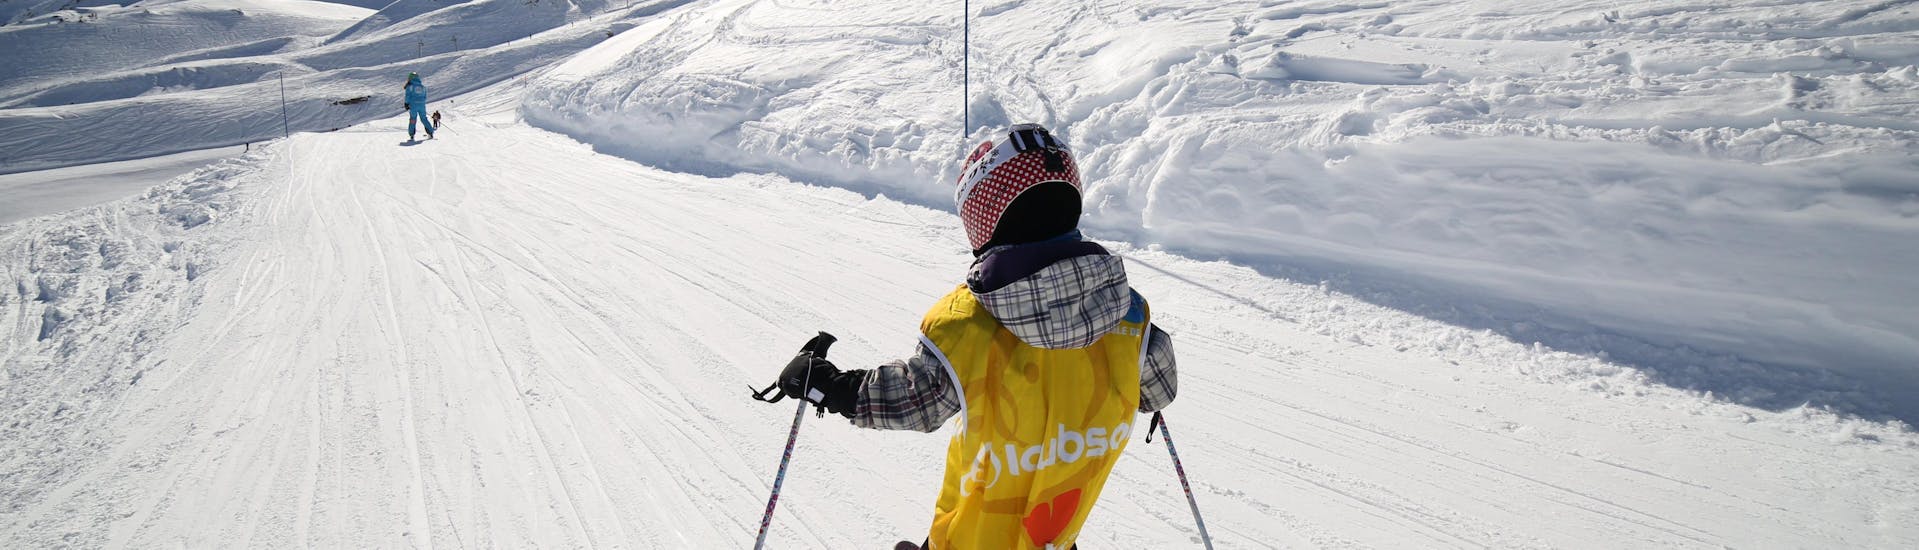 A youg skier is skiing down a snowy slope during his Kids Ski Lessons (6-12 years) - Holiday - All Levels with the ski school ESI Font Romeu.